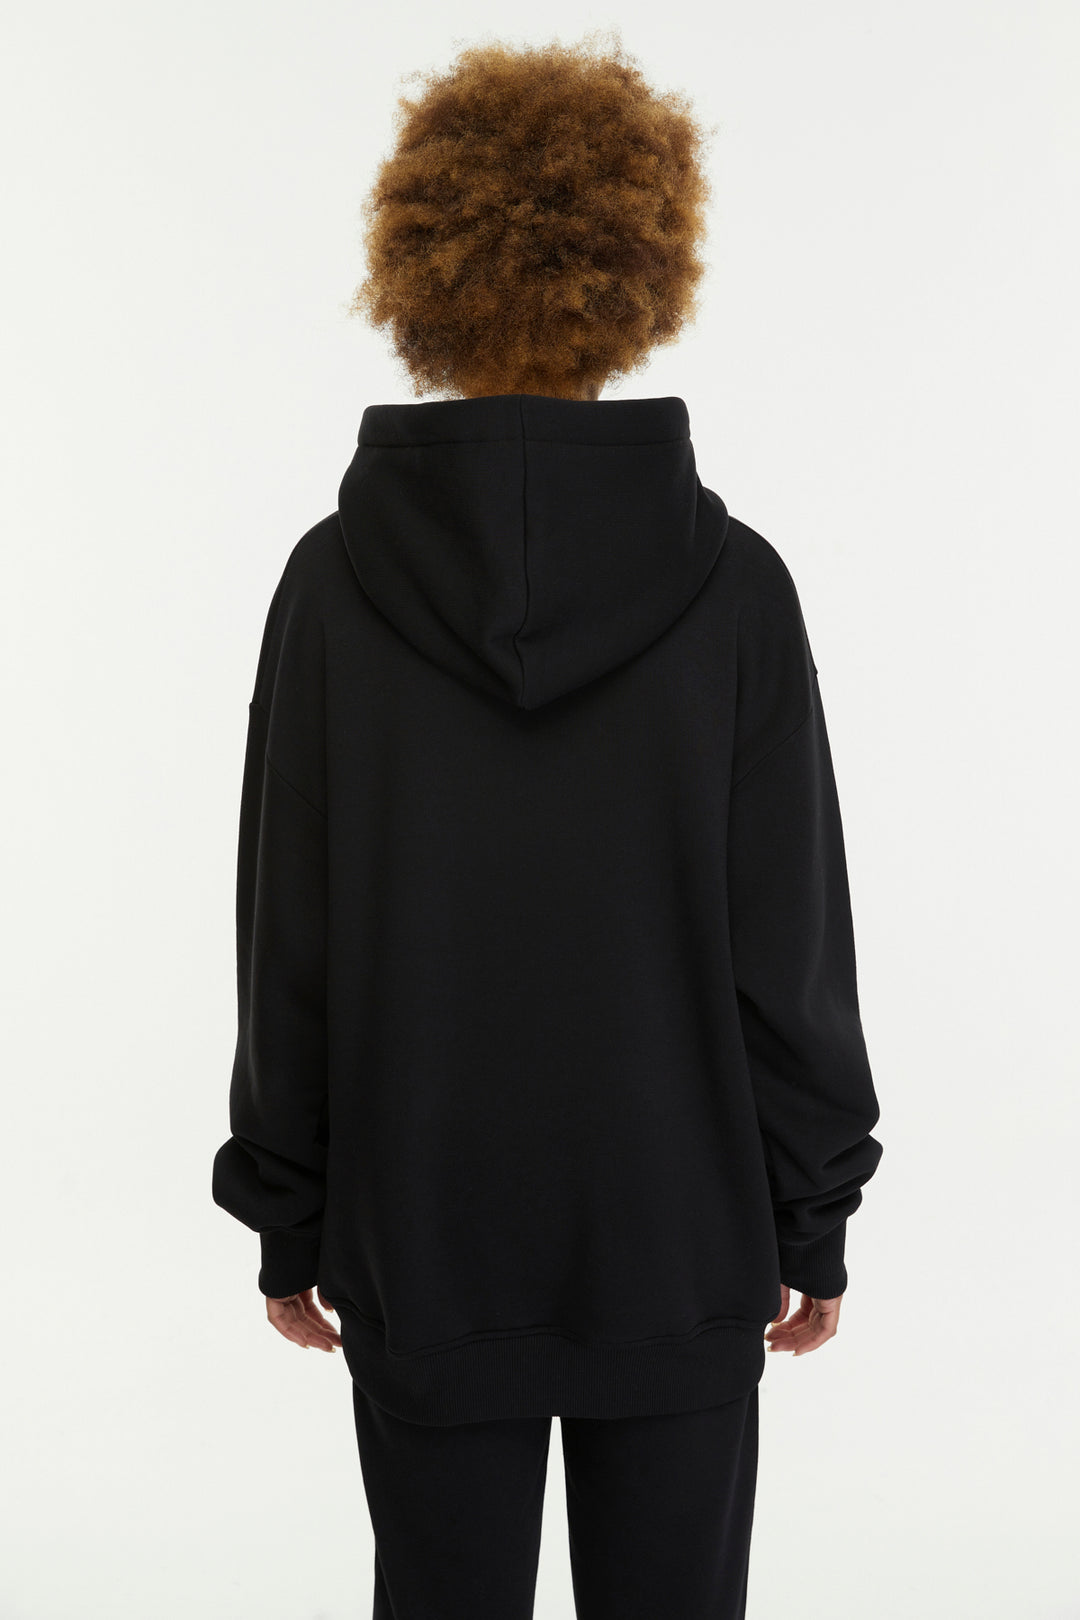 Unforgiven / Oversized Pullover Hoodie